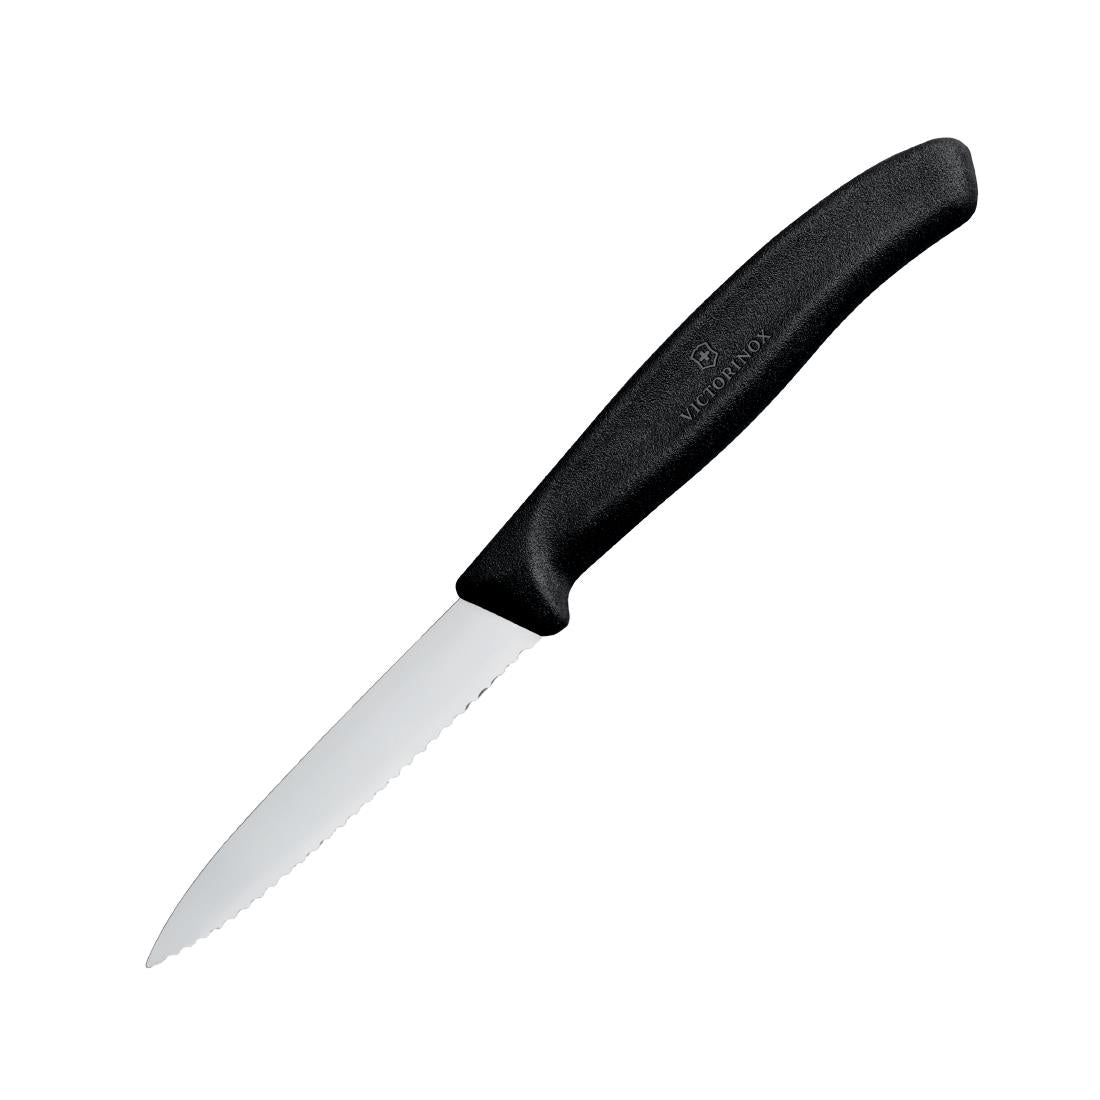 CX746 Victorinox Paring Knife Pointed Tip Serrated Edge 8cm Black JD Catering Equipment Solutions Ltd